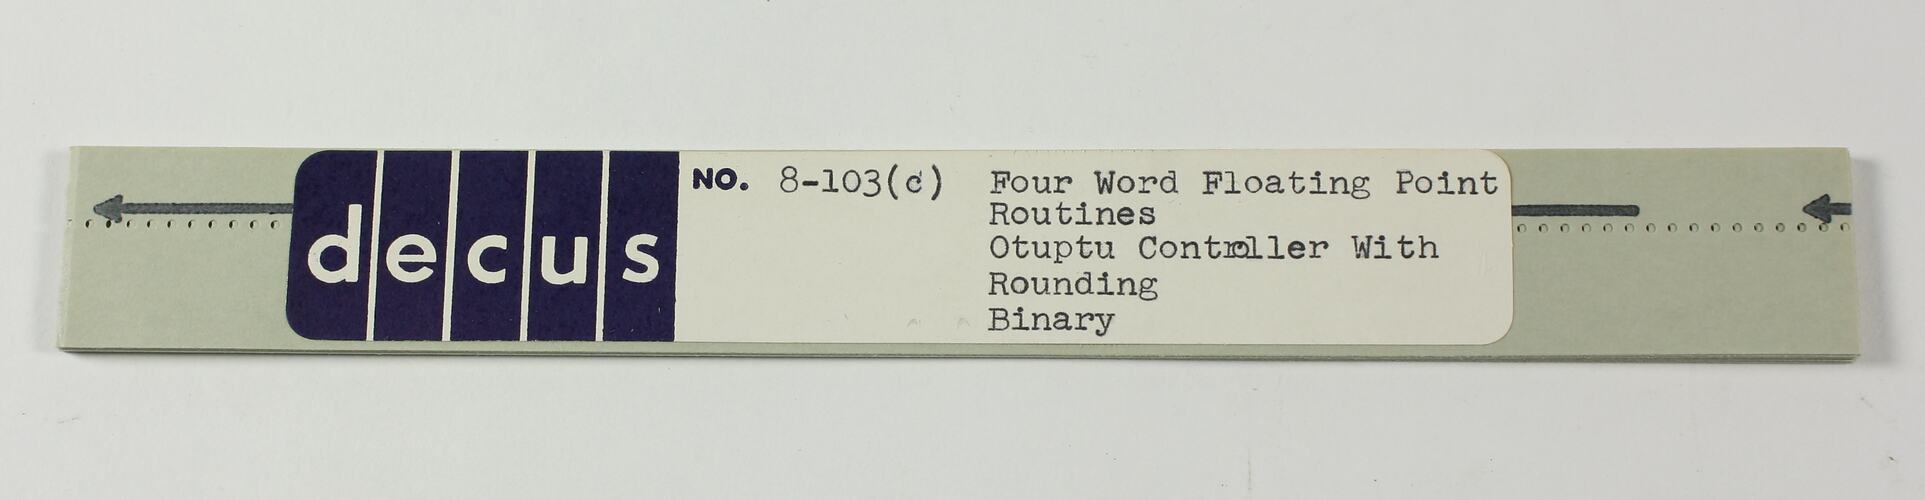 Paper Tape - DECUS, '8-103c Four Word Floating Point Routines Output Controller with Rounding, Binary'